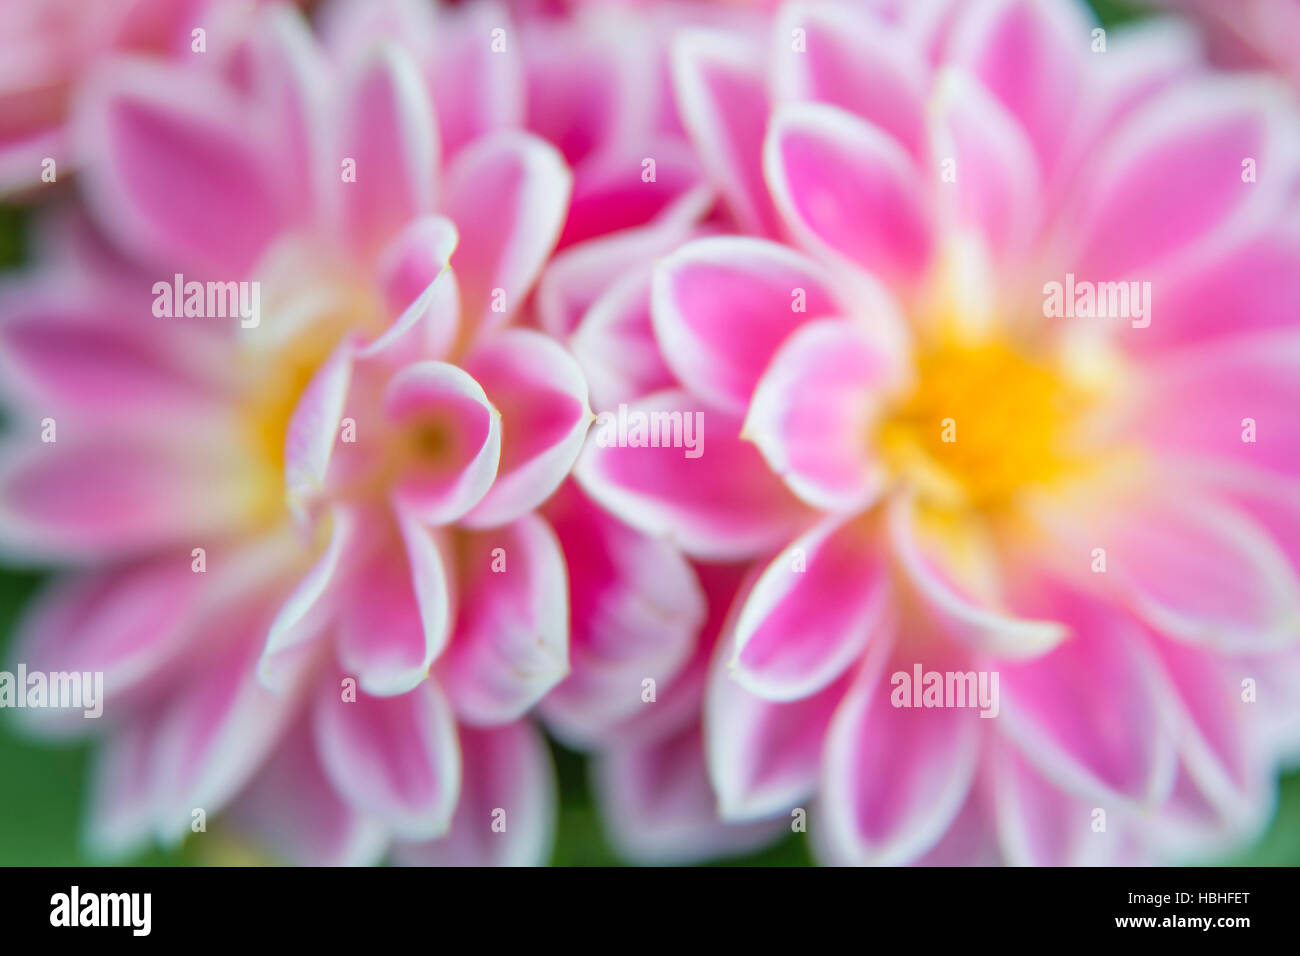 Close up macro photography view of pink flower petals with yellow and white colors. Stock Photo